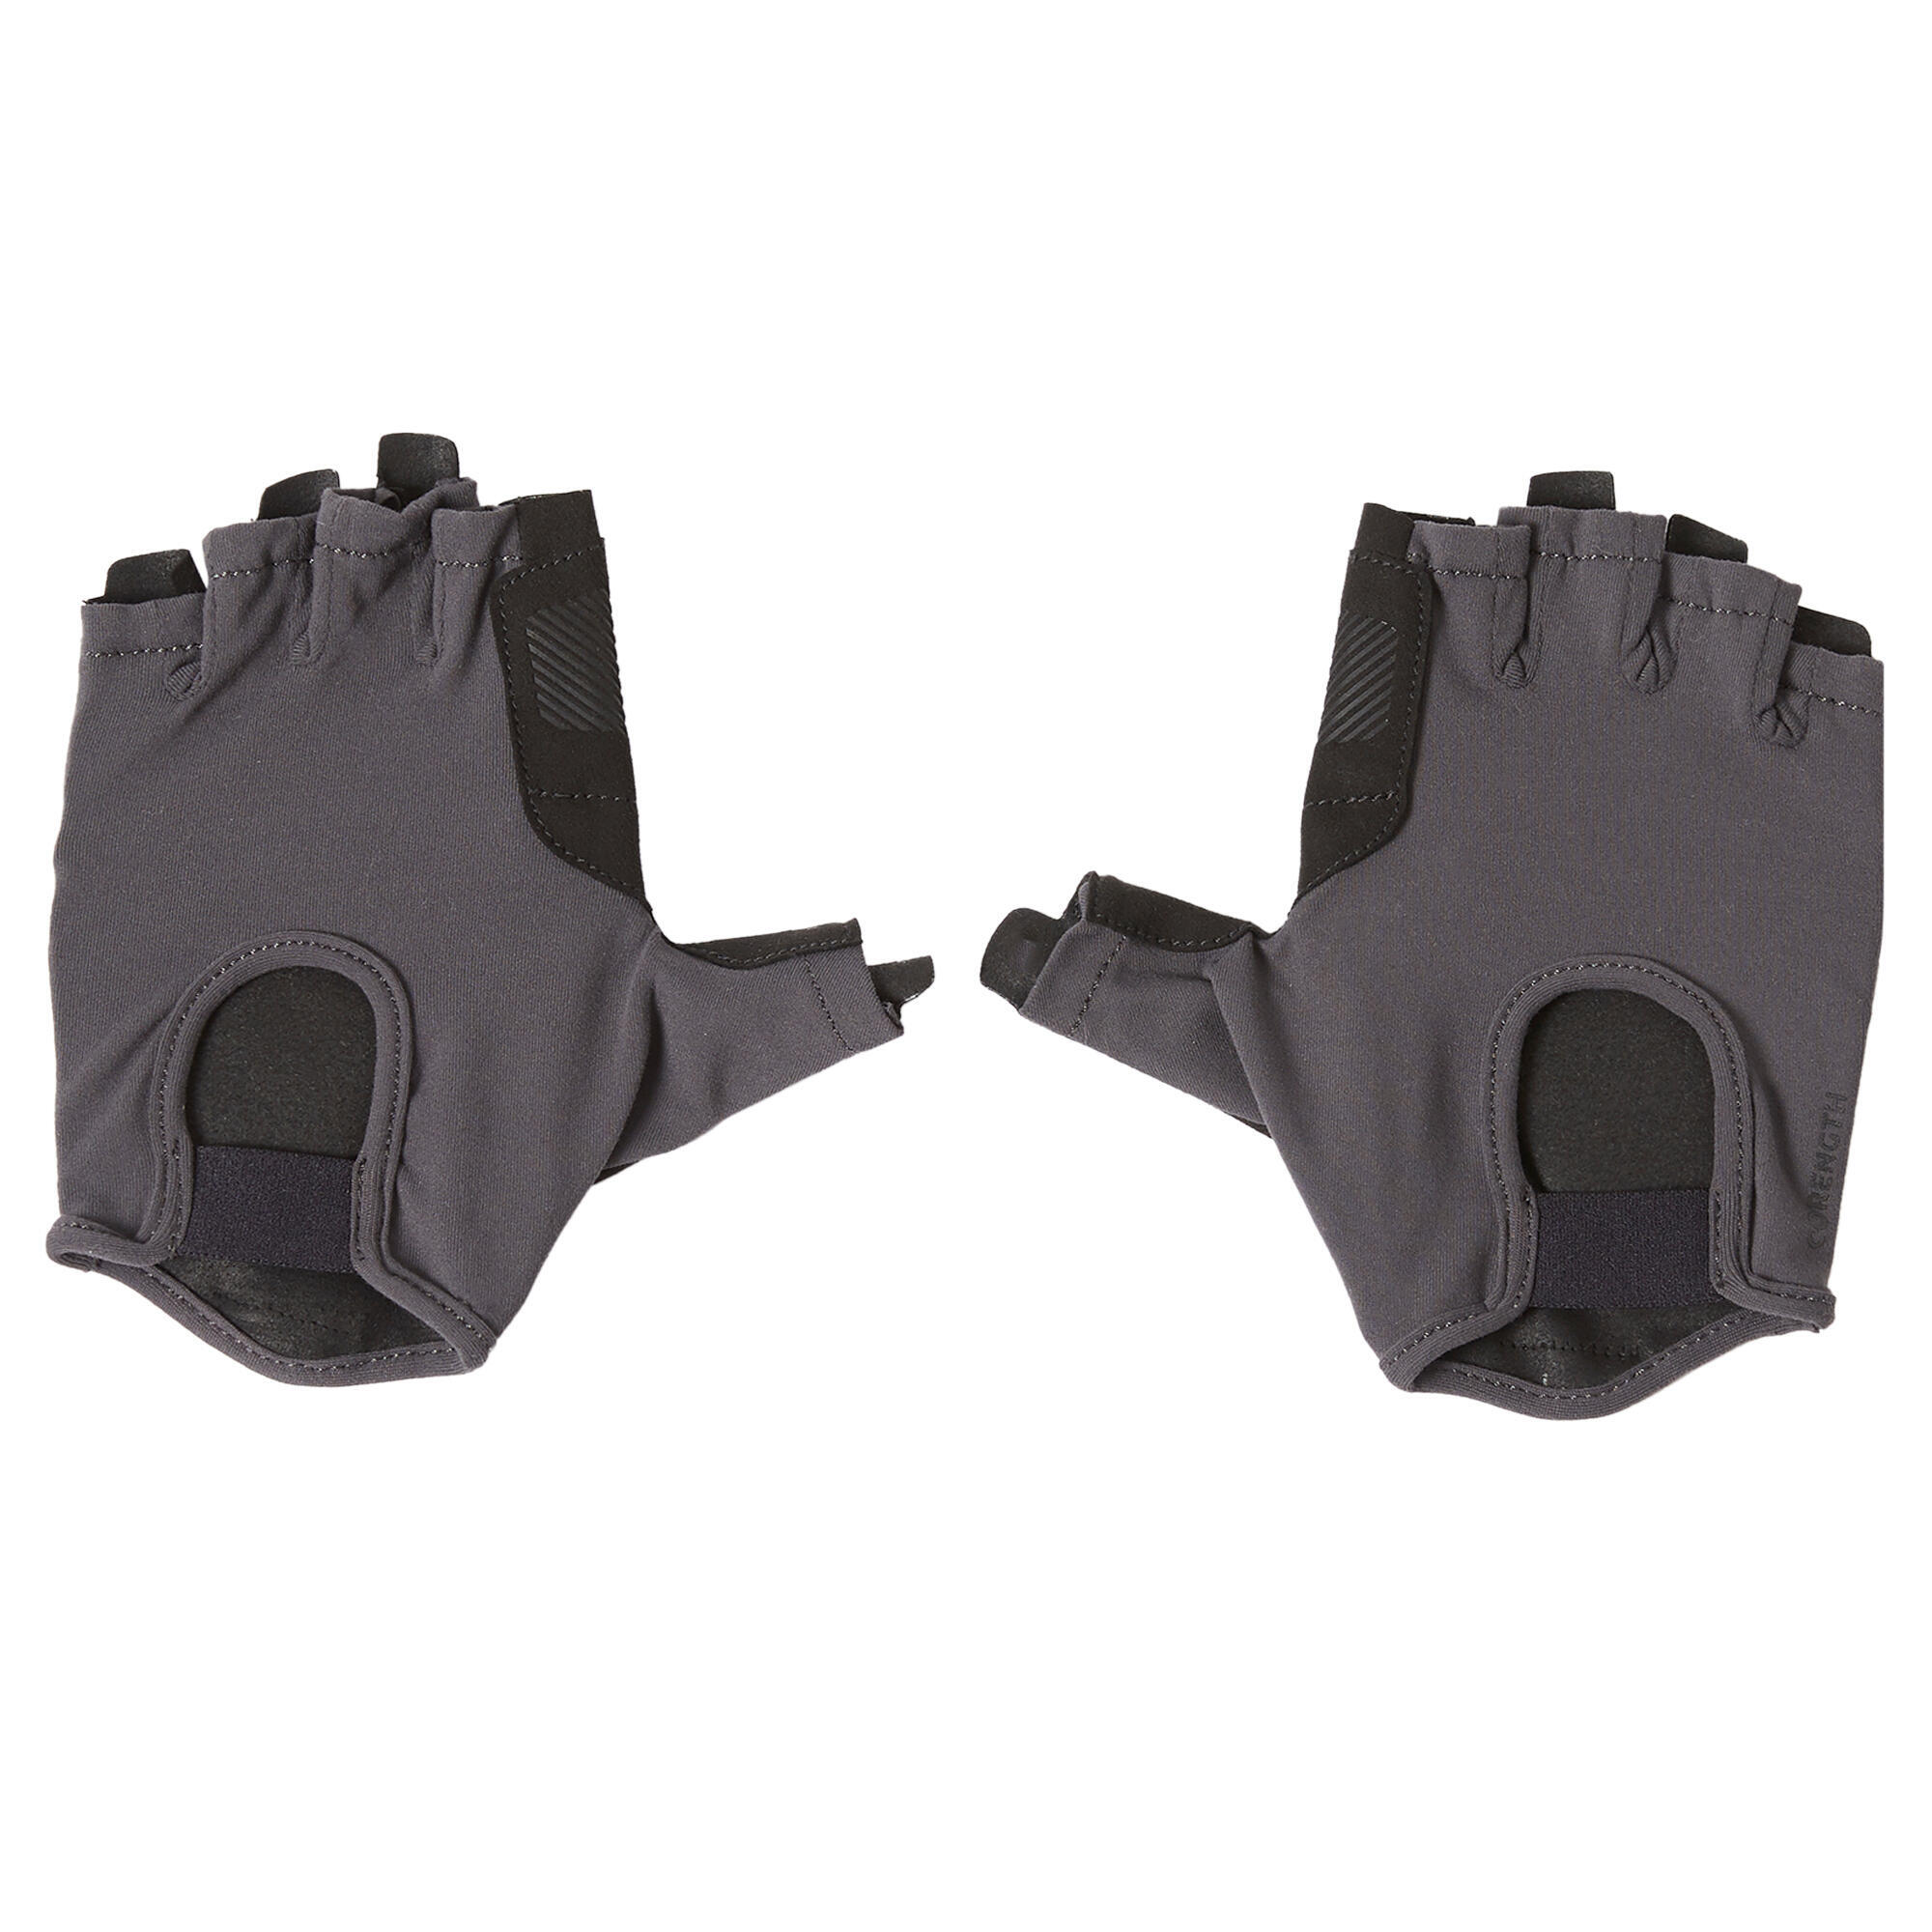 Women's Breathable Weight Training Gloves - Grey 1/4